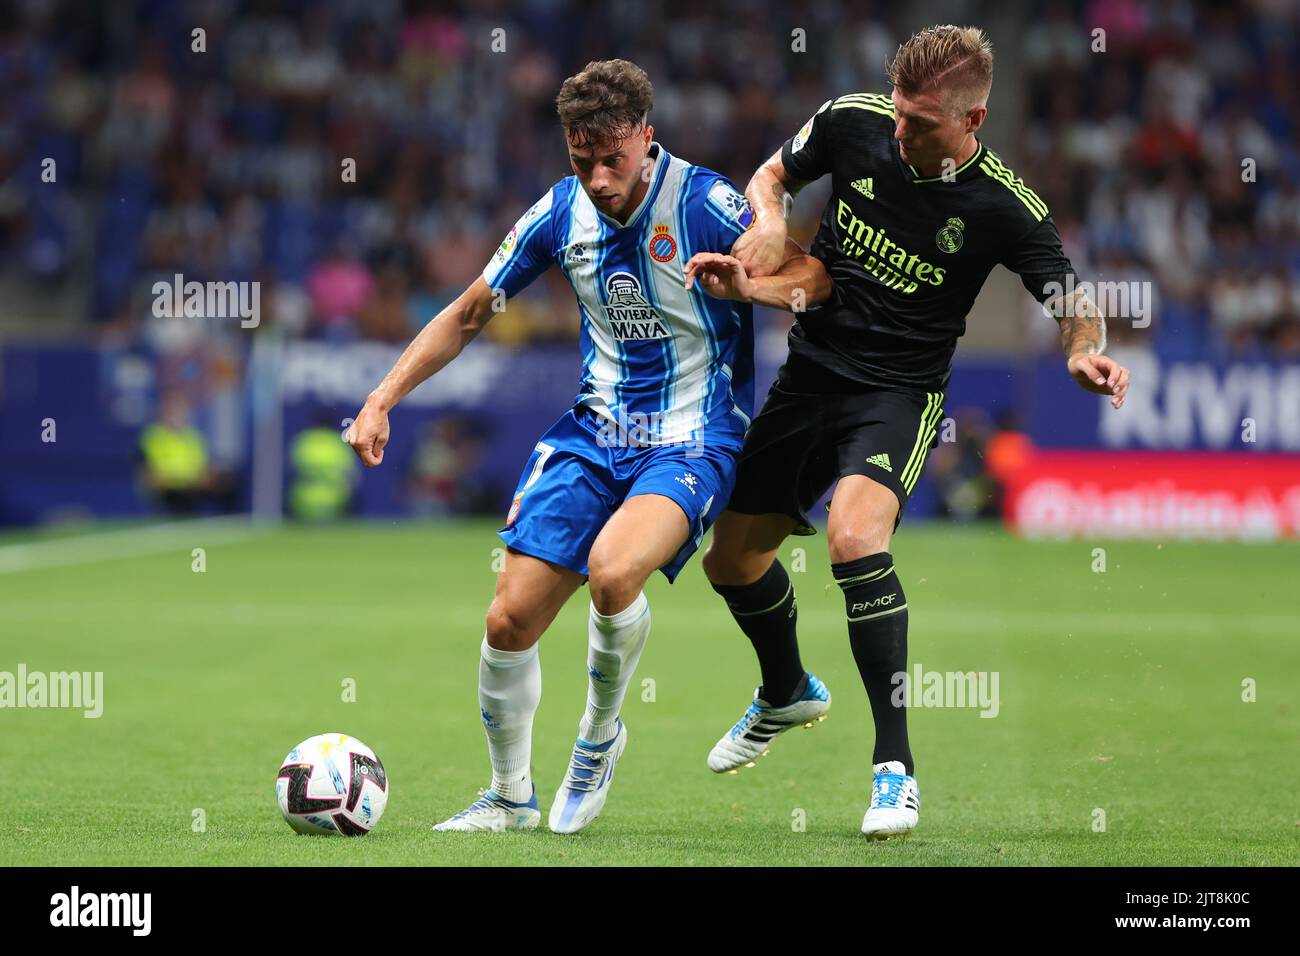 Barcelona, Spain. 28th Aug, 2022. Javi Puado of RCD Espanyol in action with Toni Kroos of Real Madrid during the La Liga match between RCD Espanyol and Real Madrid at RCDE Stadium in Barcelona, Spain. Credit: DAX Images/Alamy Live News Stock Photo